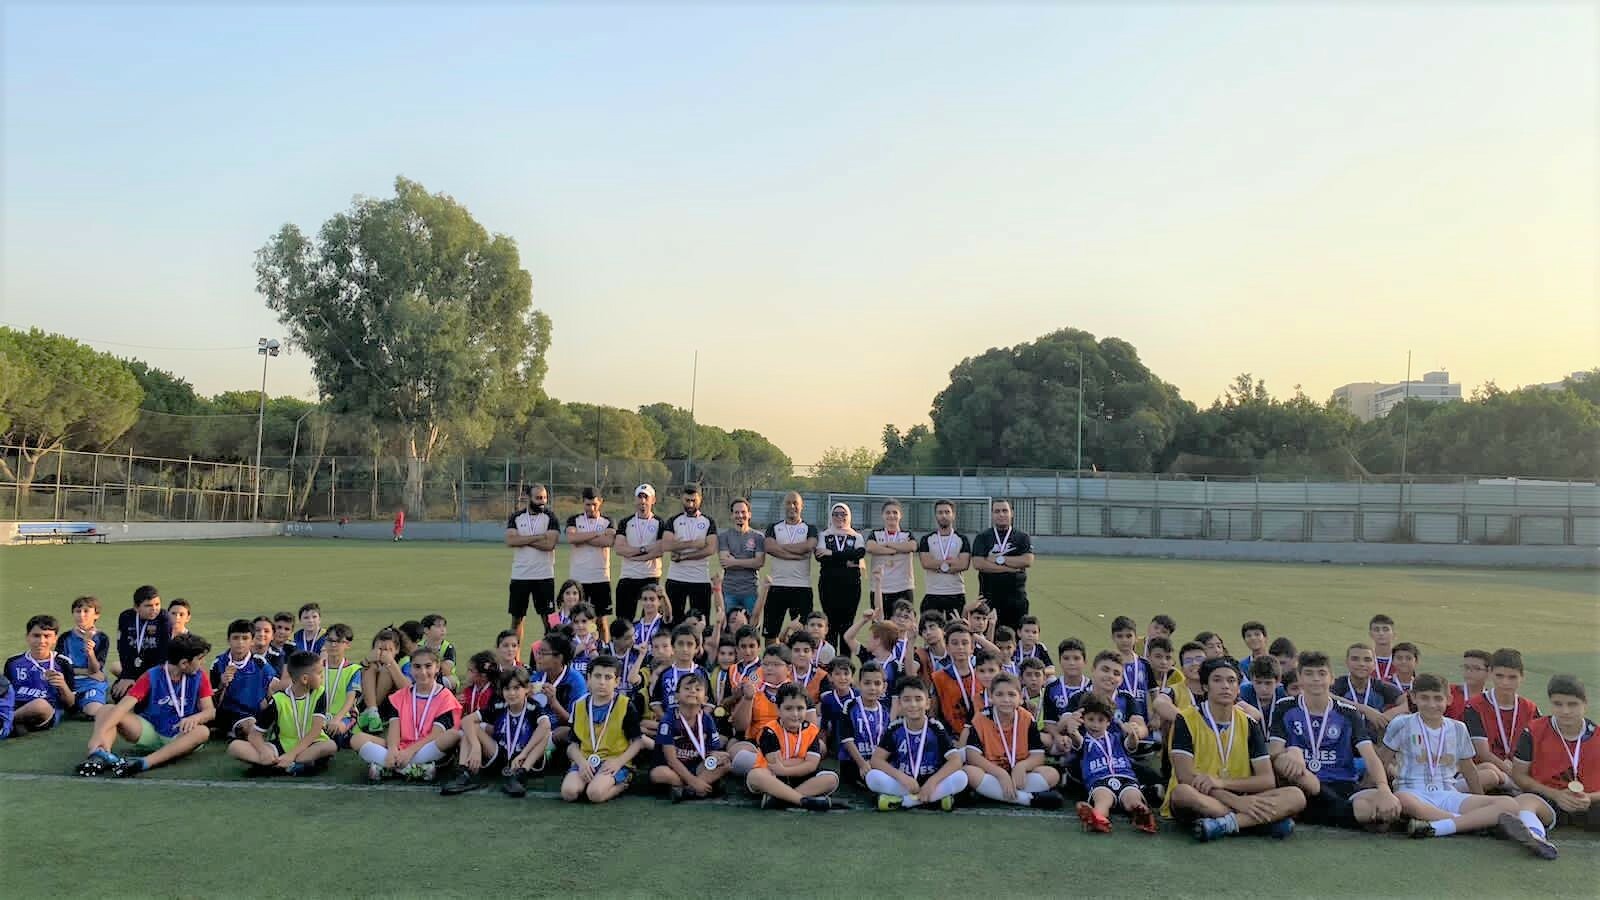 A wide photo of the large group of participants and coaches posing on the soccer field